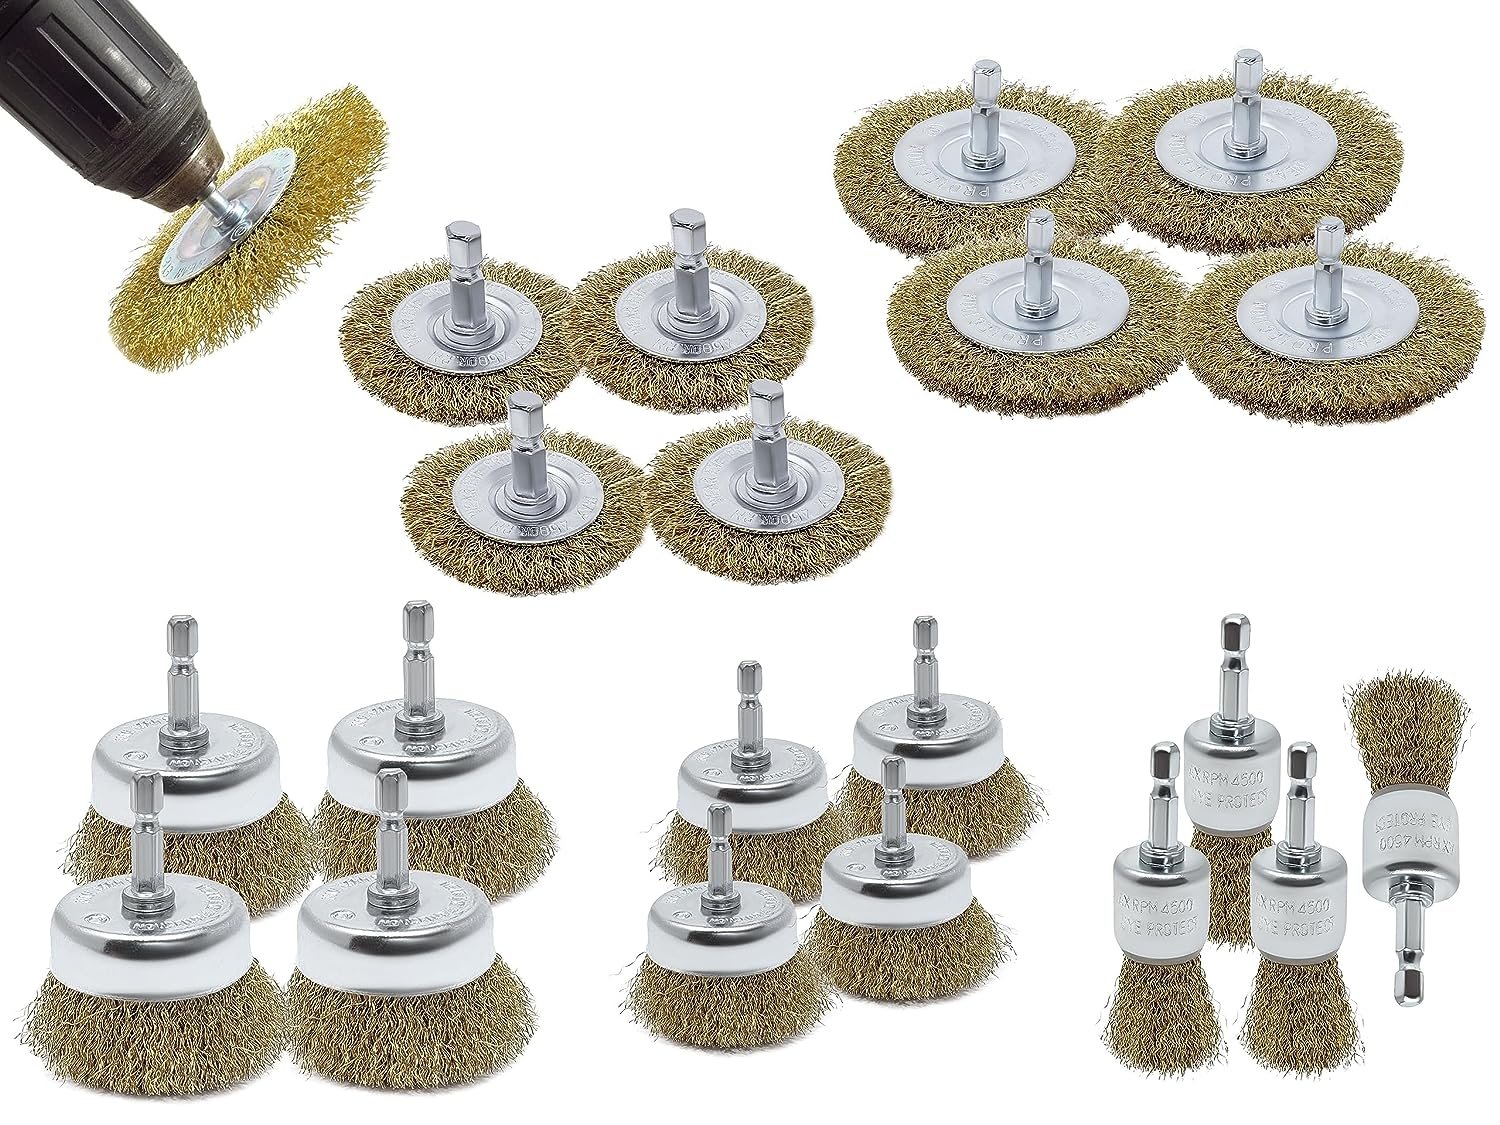 LINE10 Tools 20pk Wire Brush Drill Attachment Set Brass Coated for Cleaning Rust 1/4" Hex Shank Fits Impact Driver